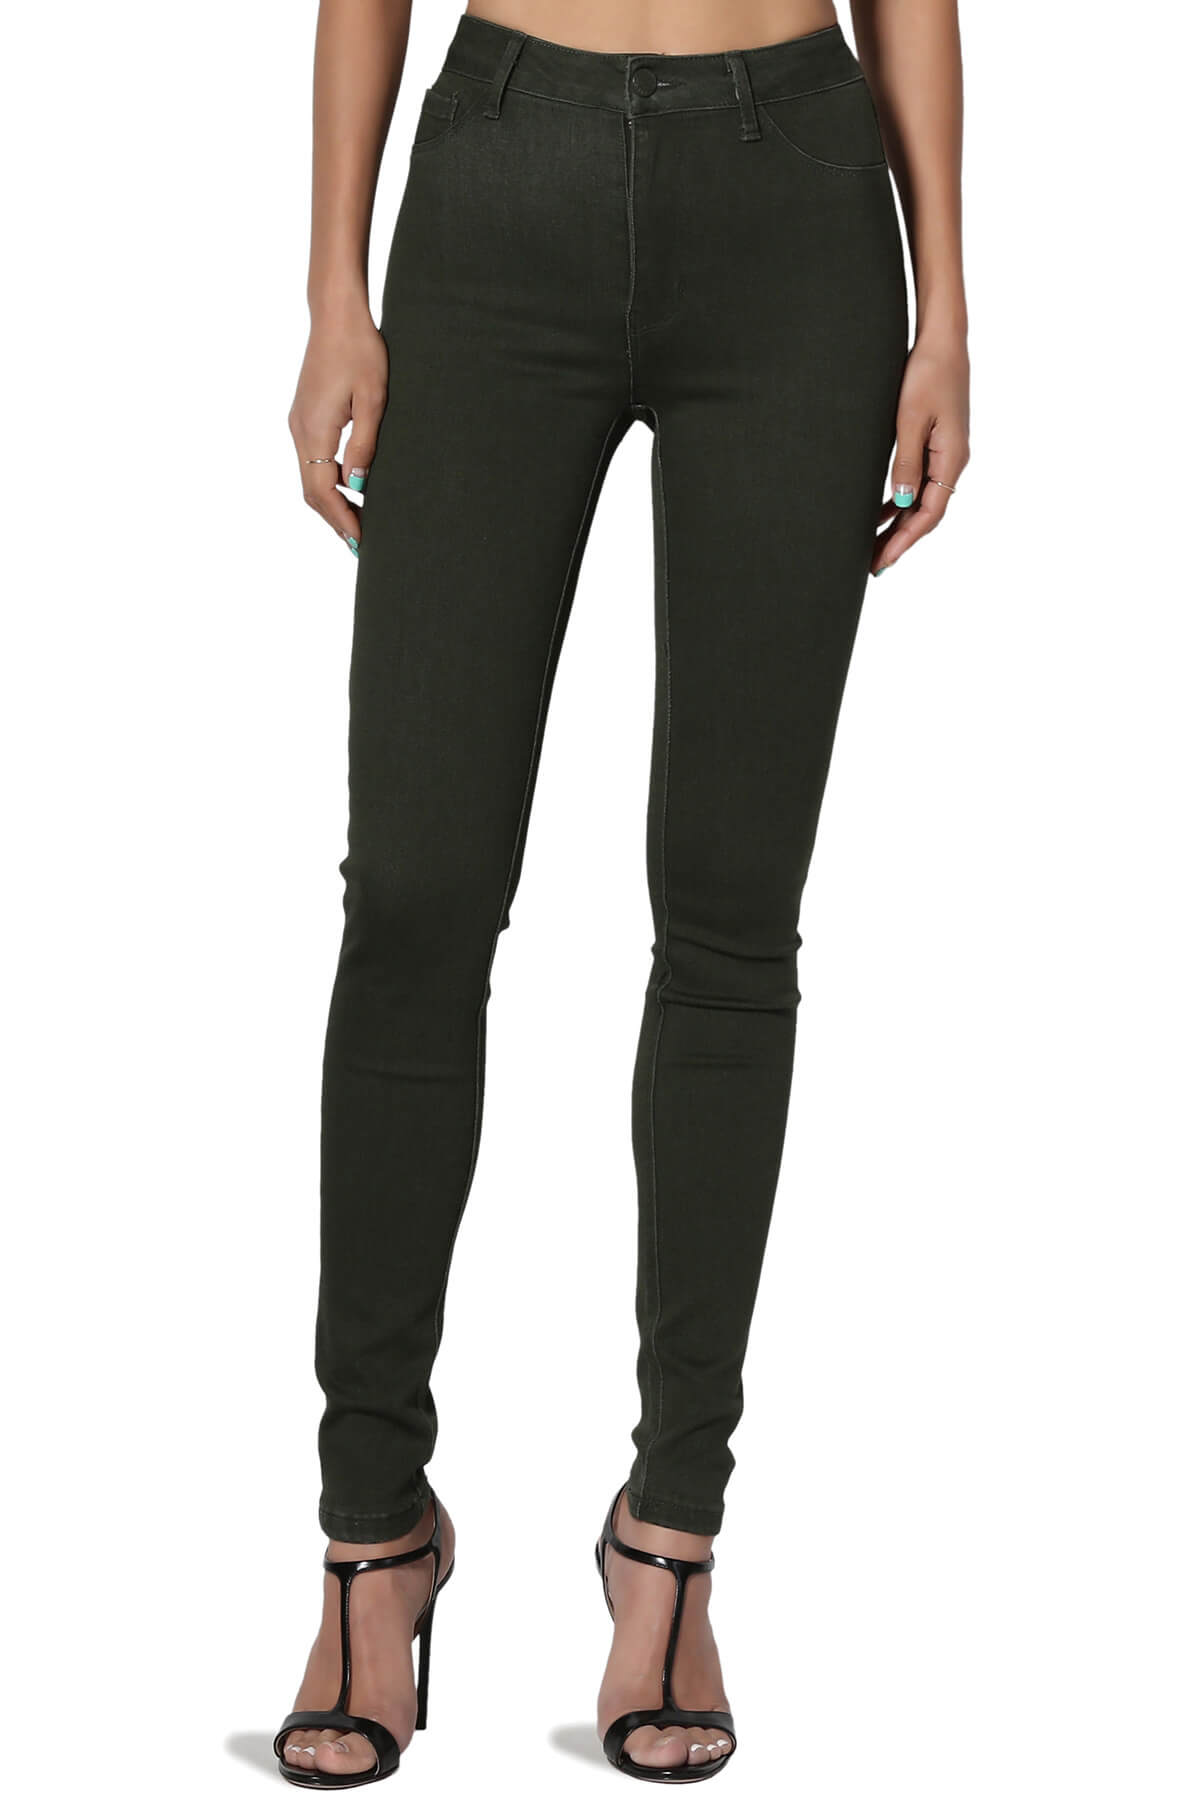 Women's Must-Have Colored High Rise Ankle Skinny Jeans Stretch Denim Jeggings - image 1 of 7